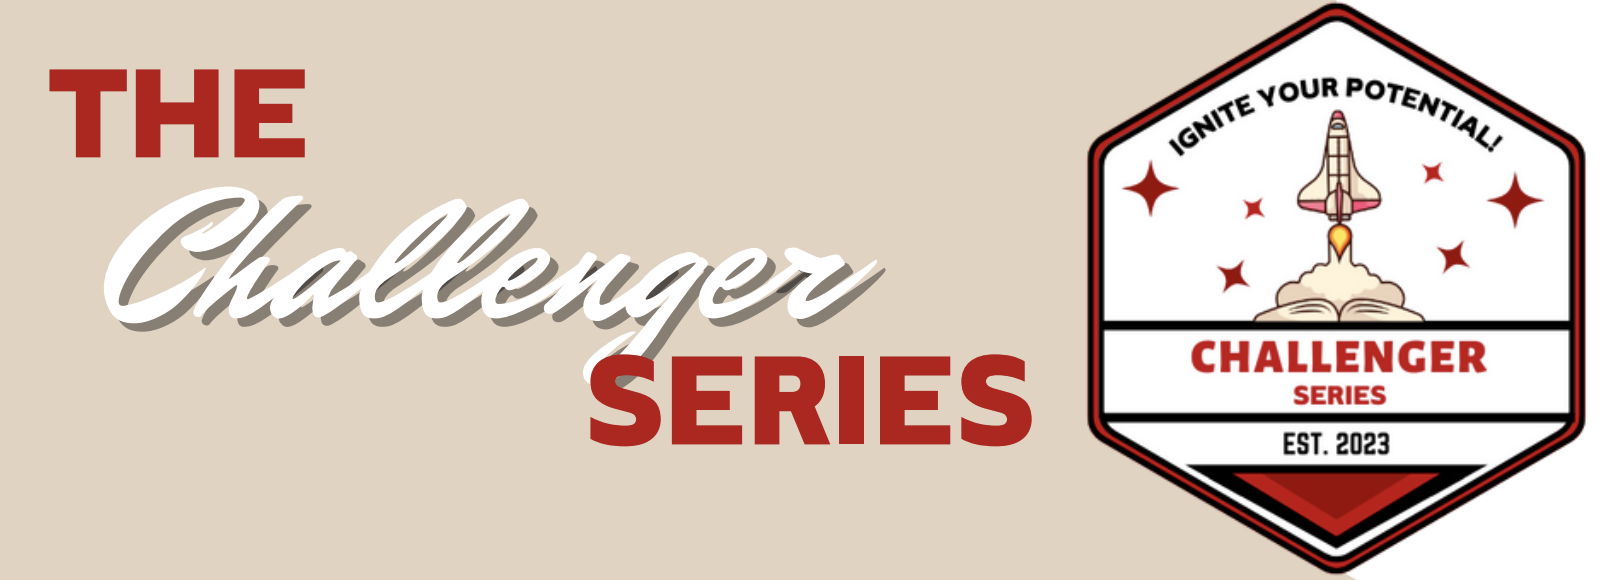 A banner which reads "The Challenger Series" in read and white text